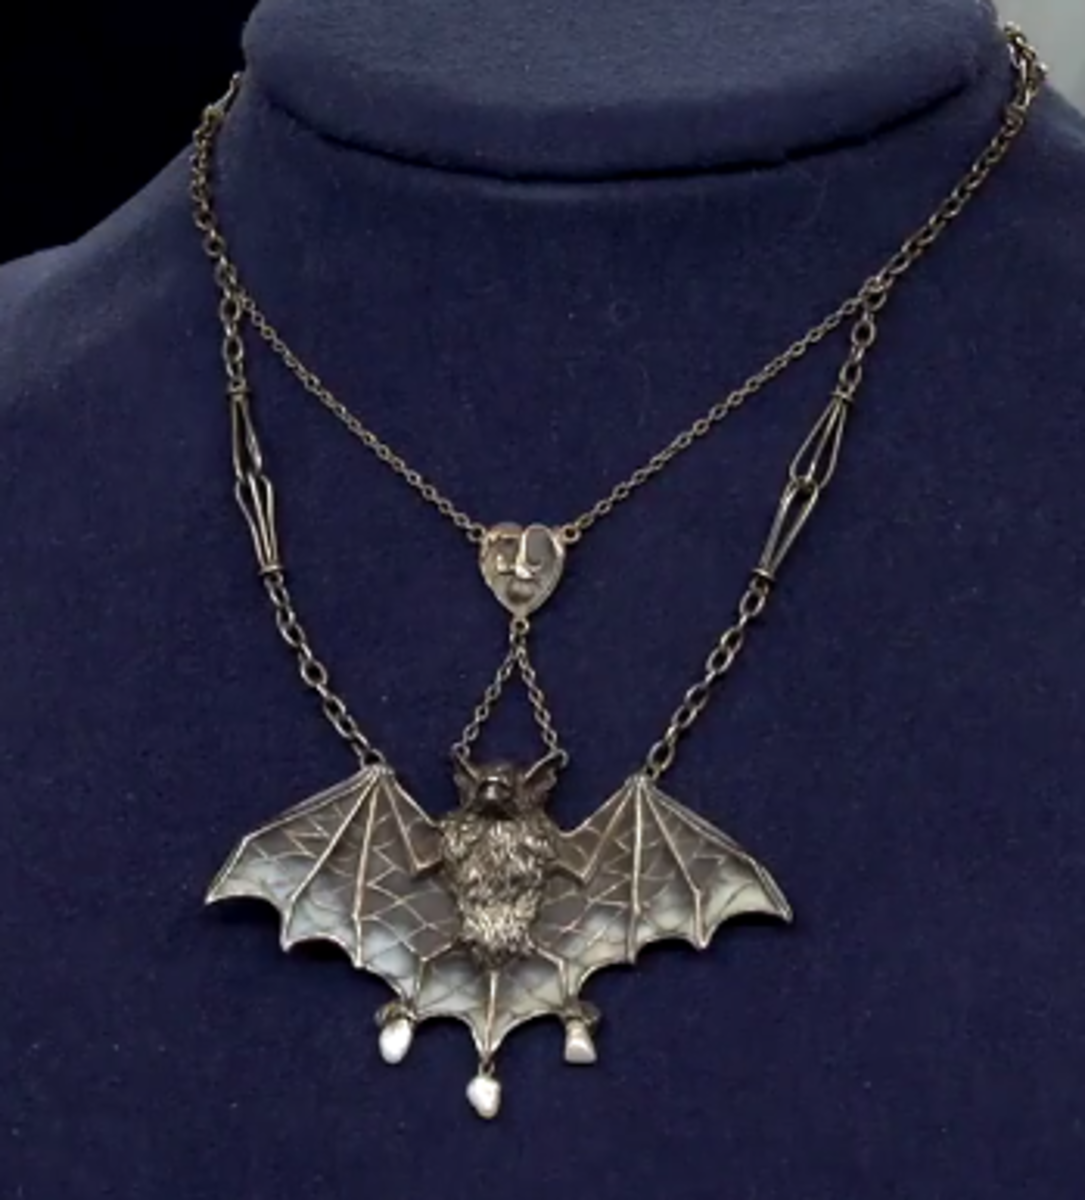 This silver and plique-à-Jour enamel bat festoon necklace with seed pearls, circa 1900, was appraised on “Antiques Roadshow” in 2017 between $4,000-$6,000.